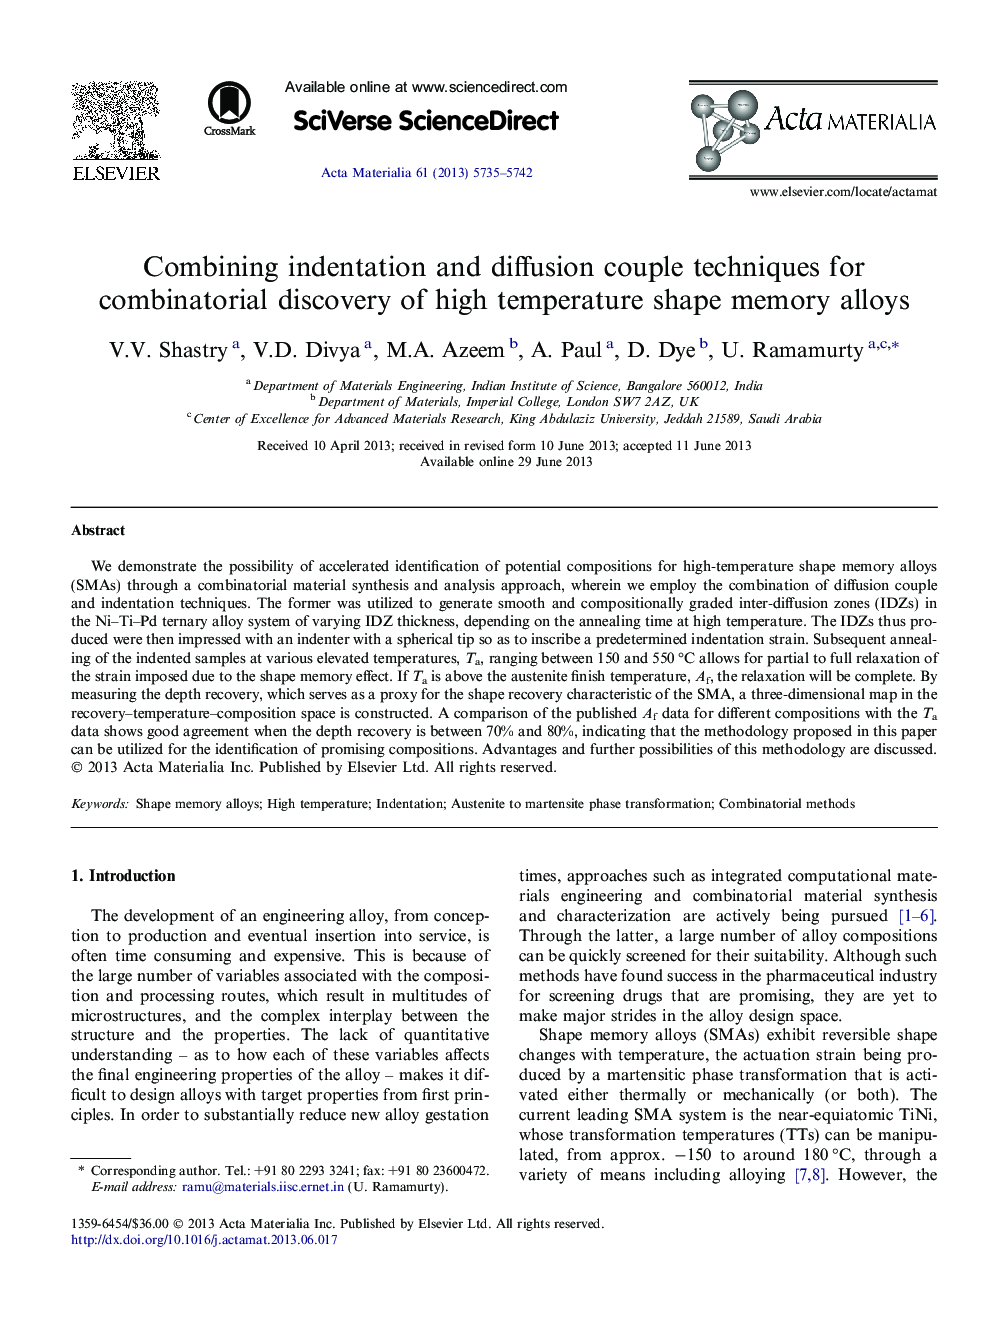 Combining indentation and diffusion couple techniques for combinatorial discovery of high temperature shape memory alloys